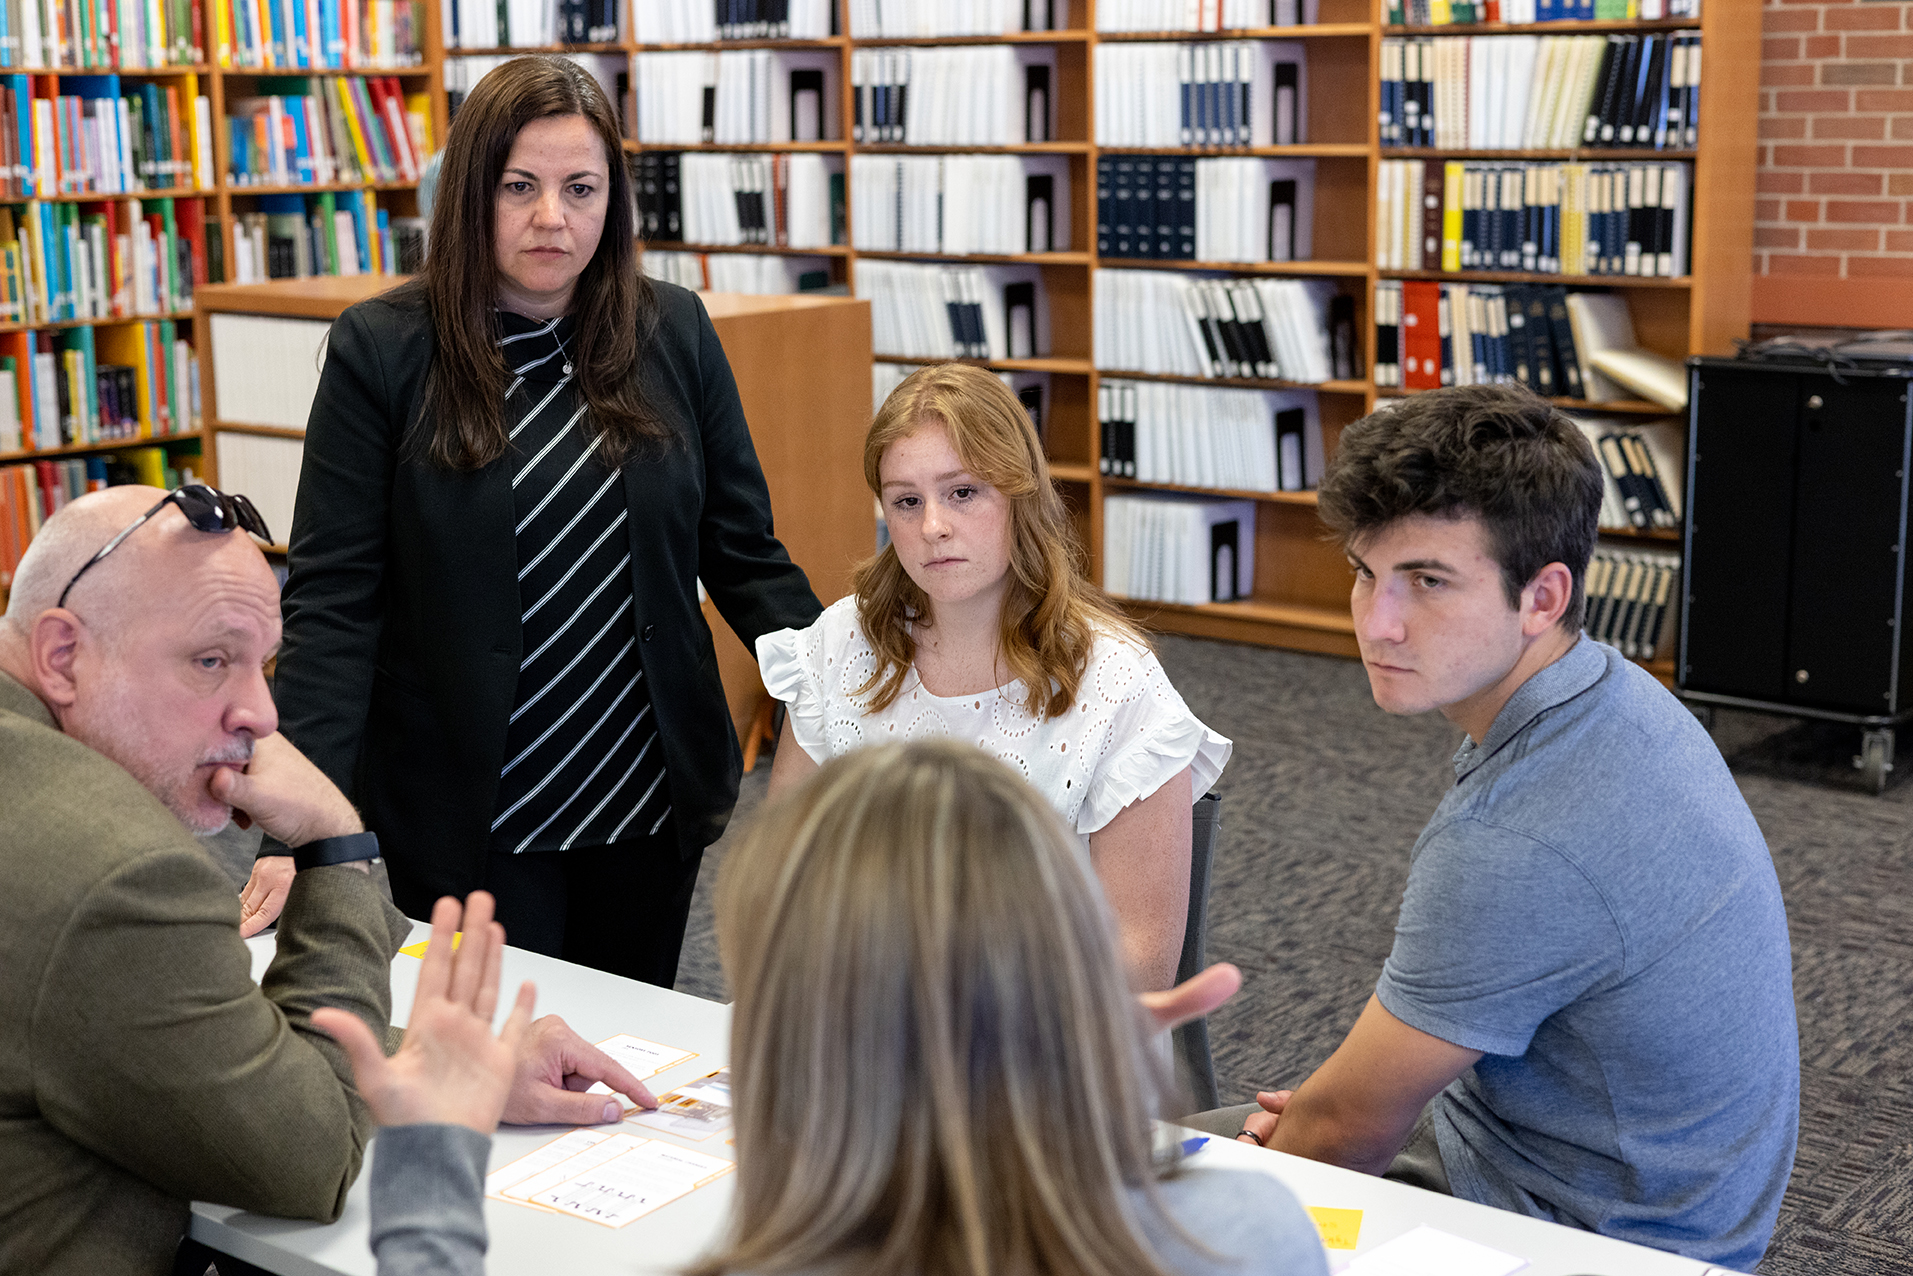 A faculty member instructs students in a library.